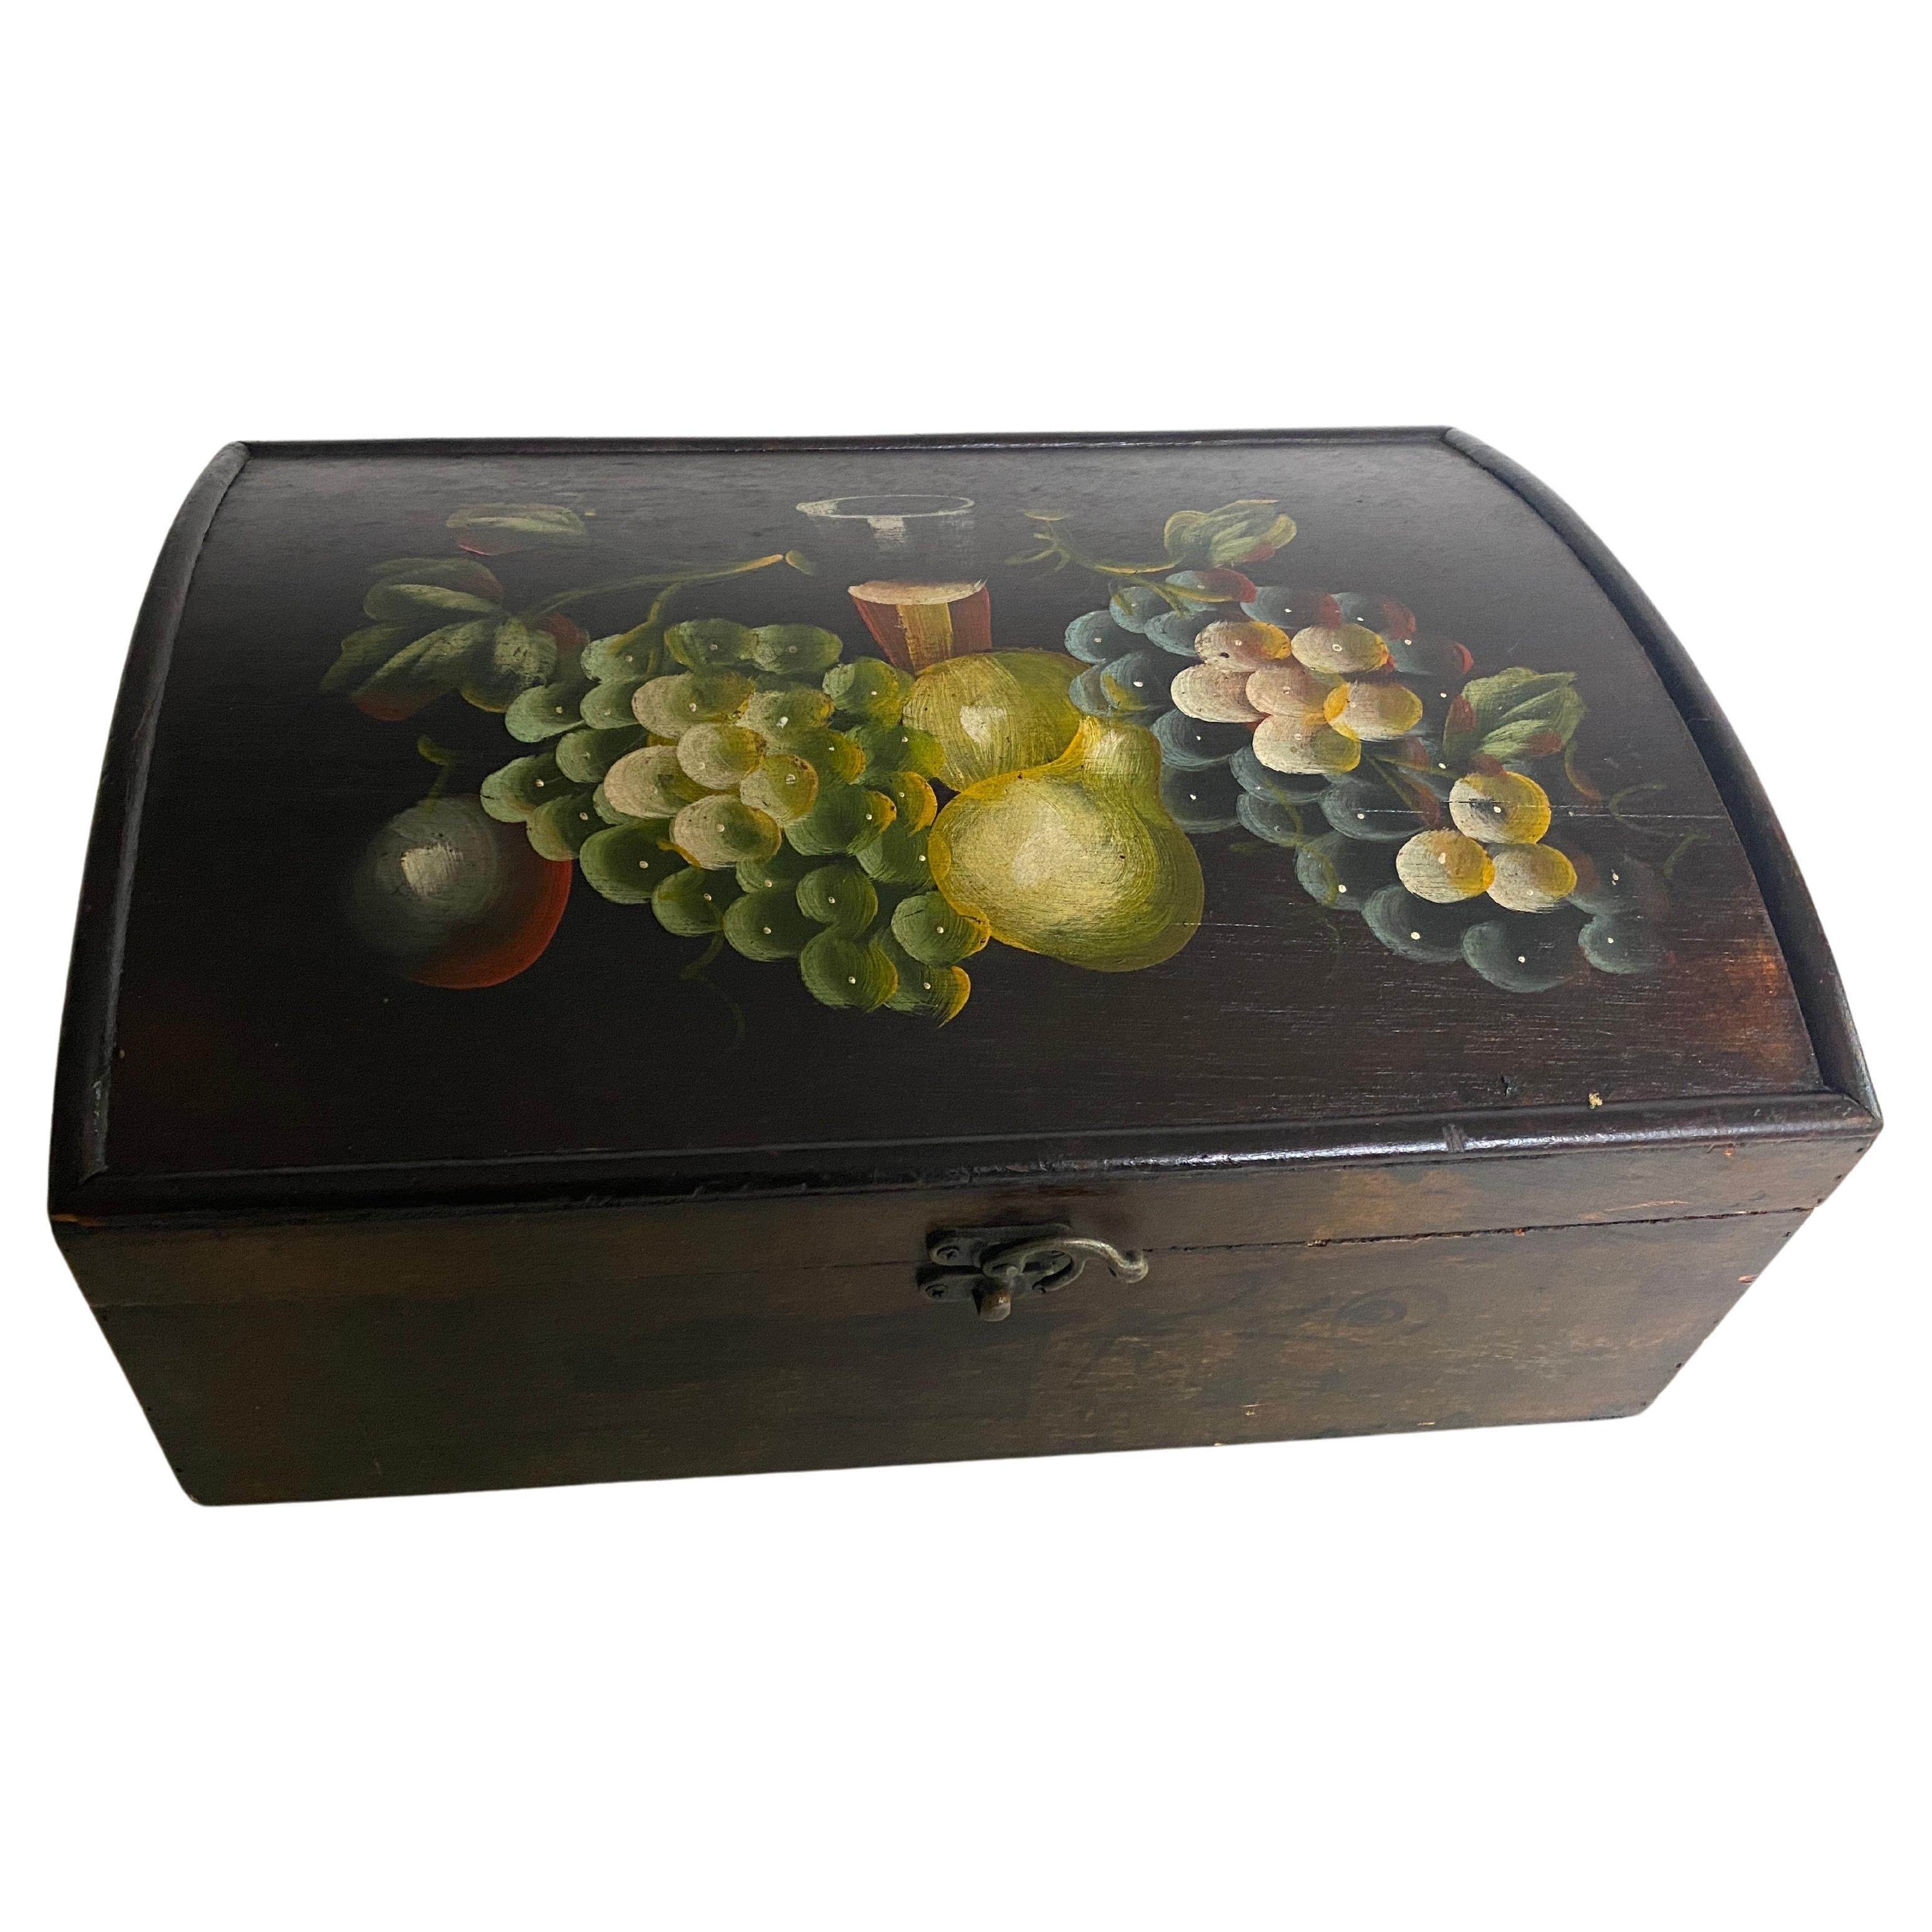 This large box is a jewelry box or a decorative box. It was made in the 20th century, in England, Period. Its lid is made in wood, Green and brown in color.